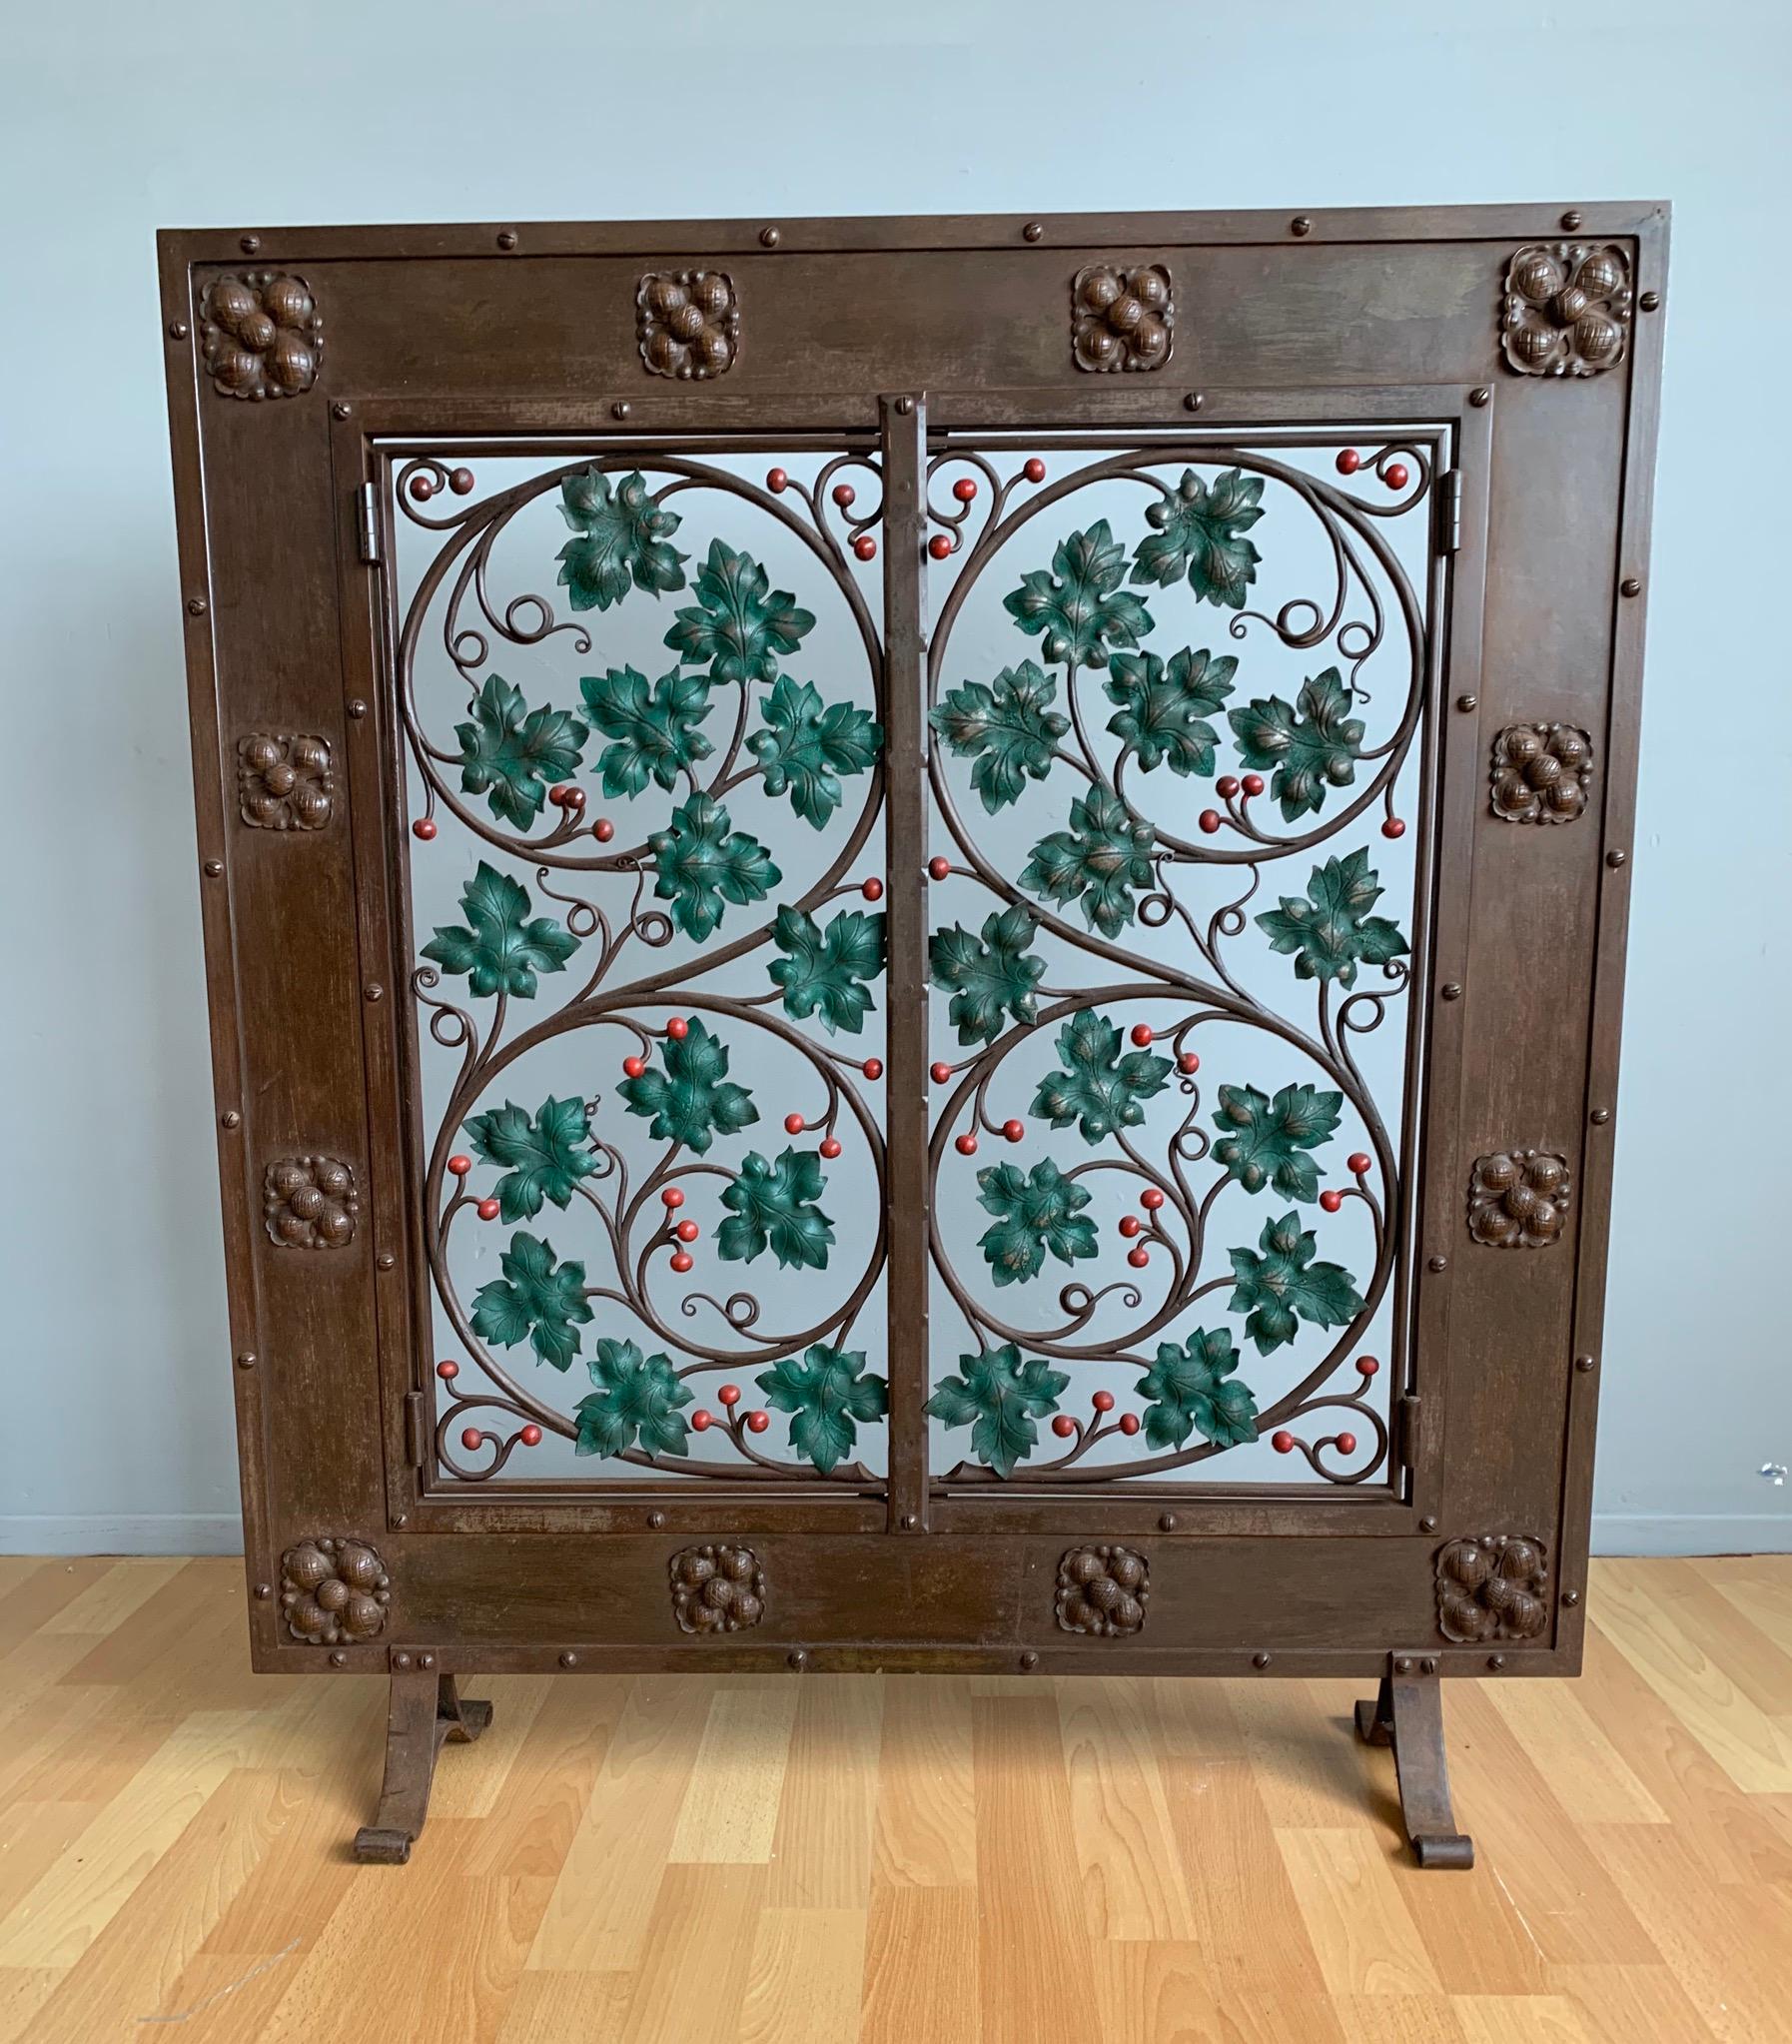 Highly decorative and all handcrafted, ironwork fire screen.

We can think of more than one way to use this fantastically decorative screen. Around the turn of the century it would have been made to Stand in front of the fireplace in the warmer part